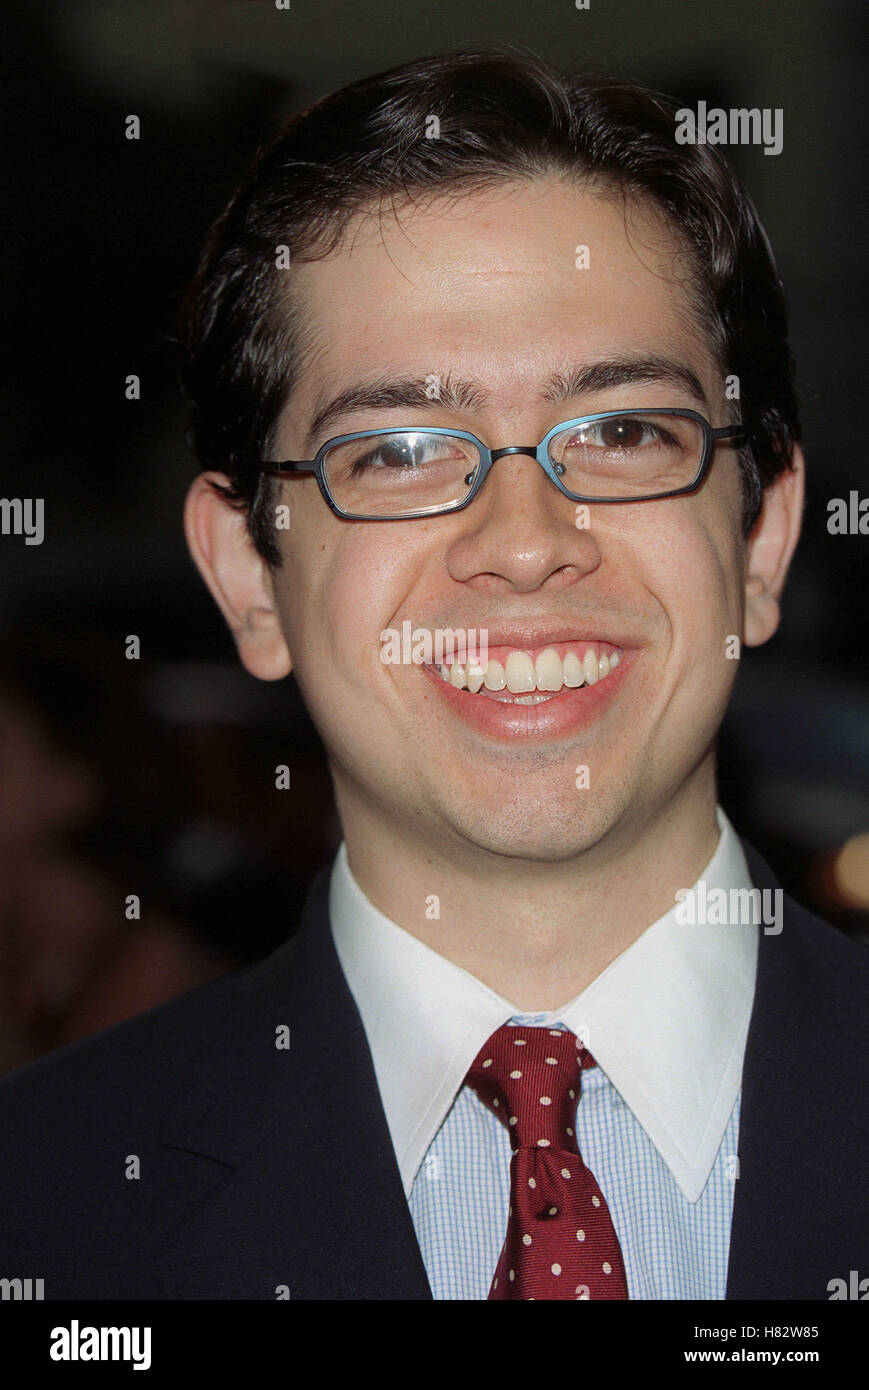 GEOFFERY AREND 'BUBBLE BOY' FILM PREMIERE HOLLYWOOD LOS ANGELES USA 23 August 2001 Stock Photo